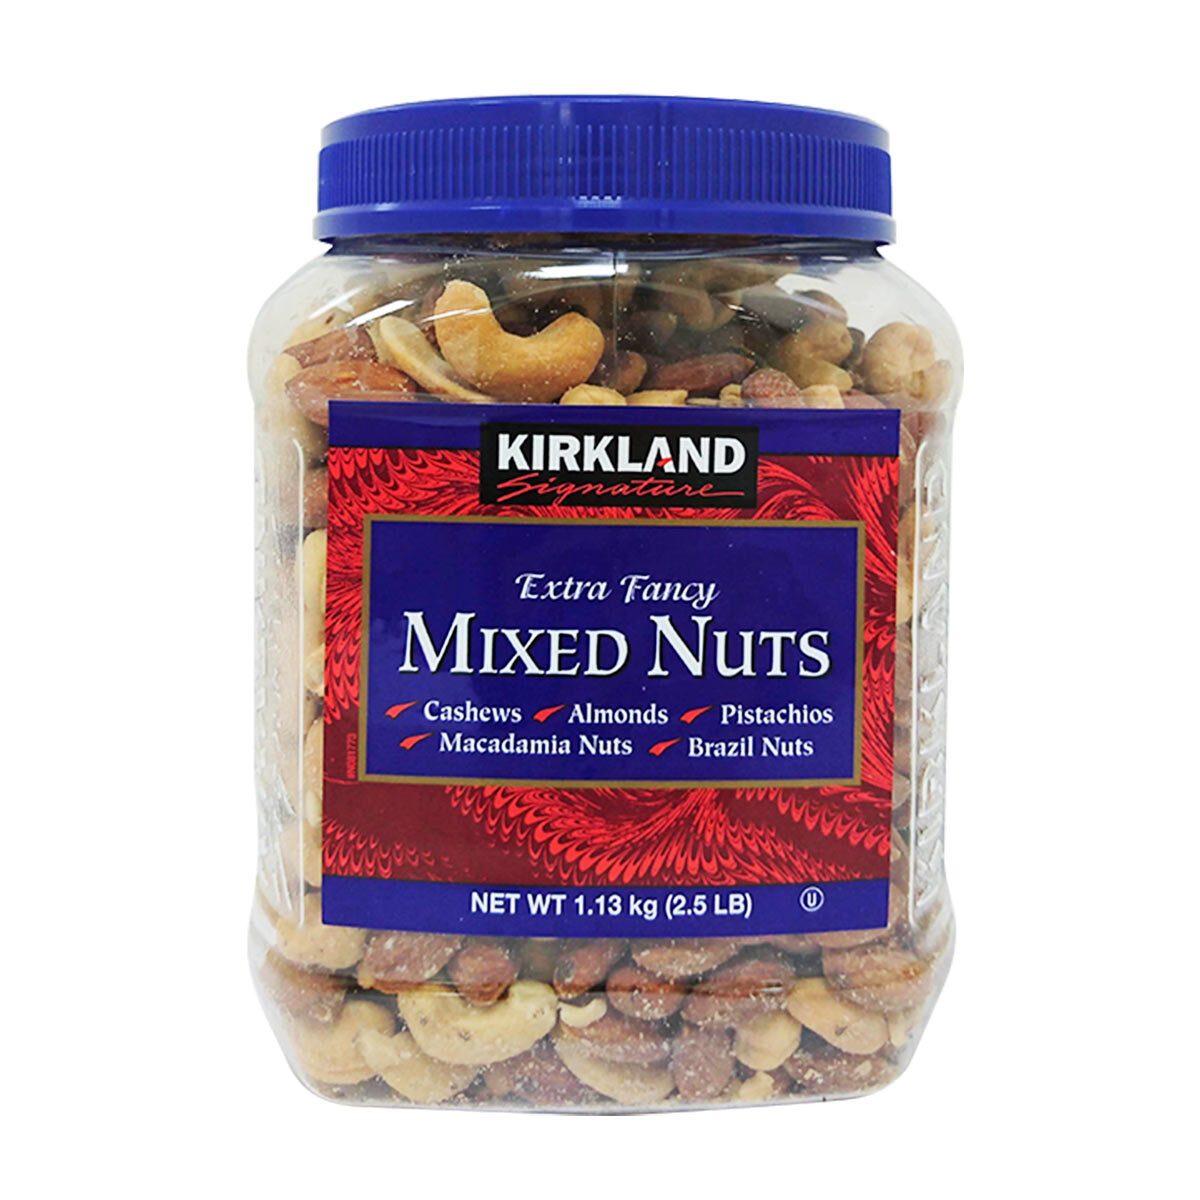 Kirkland Signature Extra Fancy Mixed Nuts, 1.13kg Front View